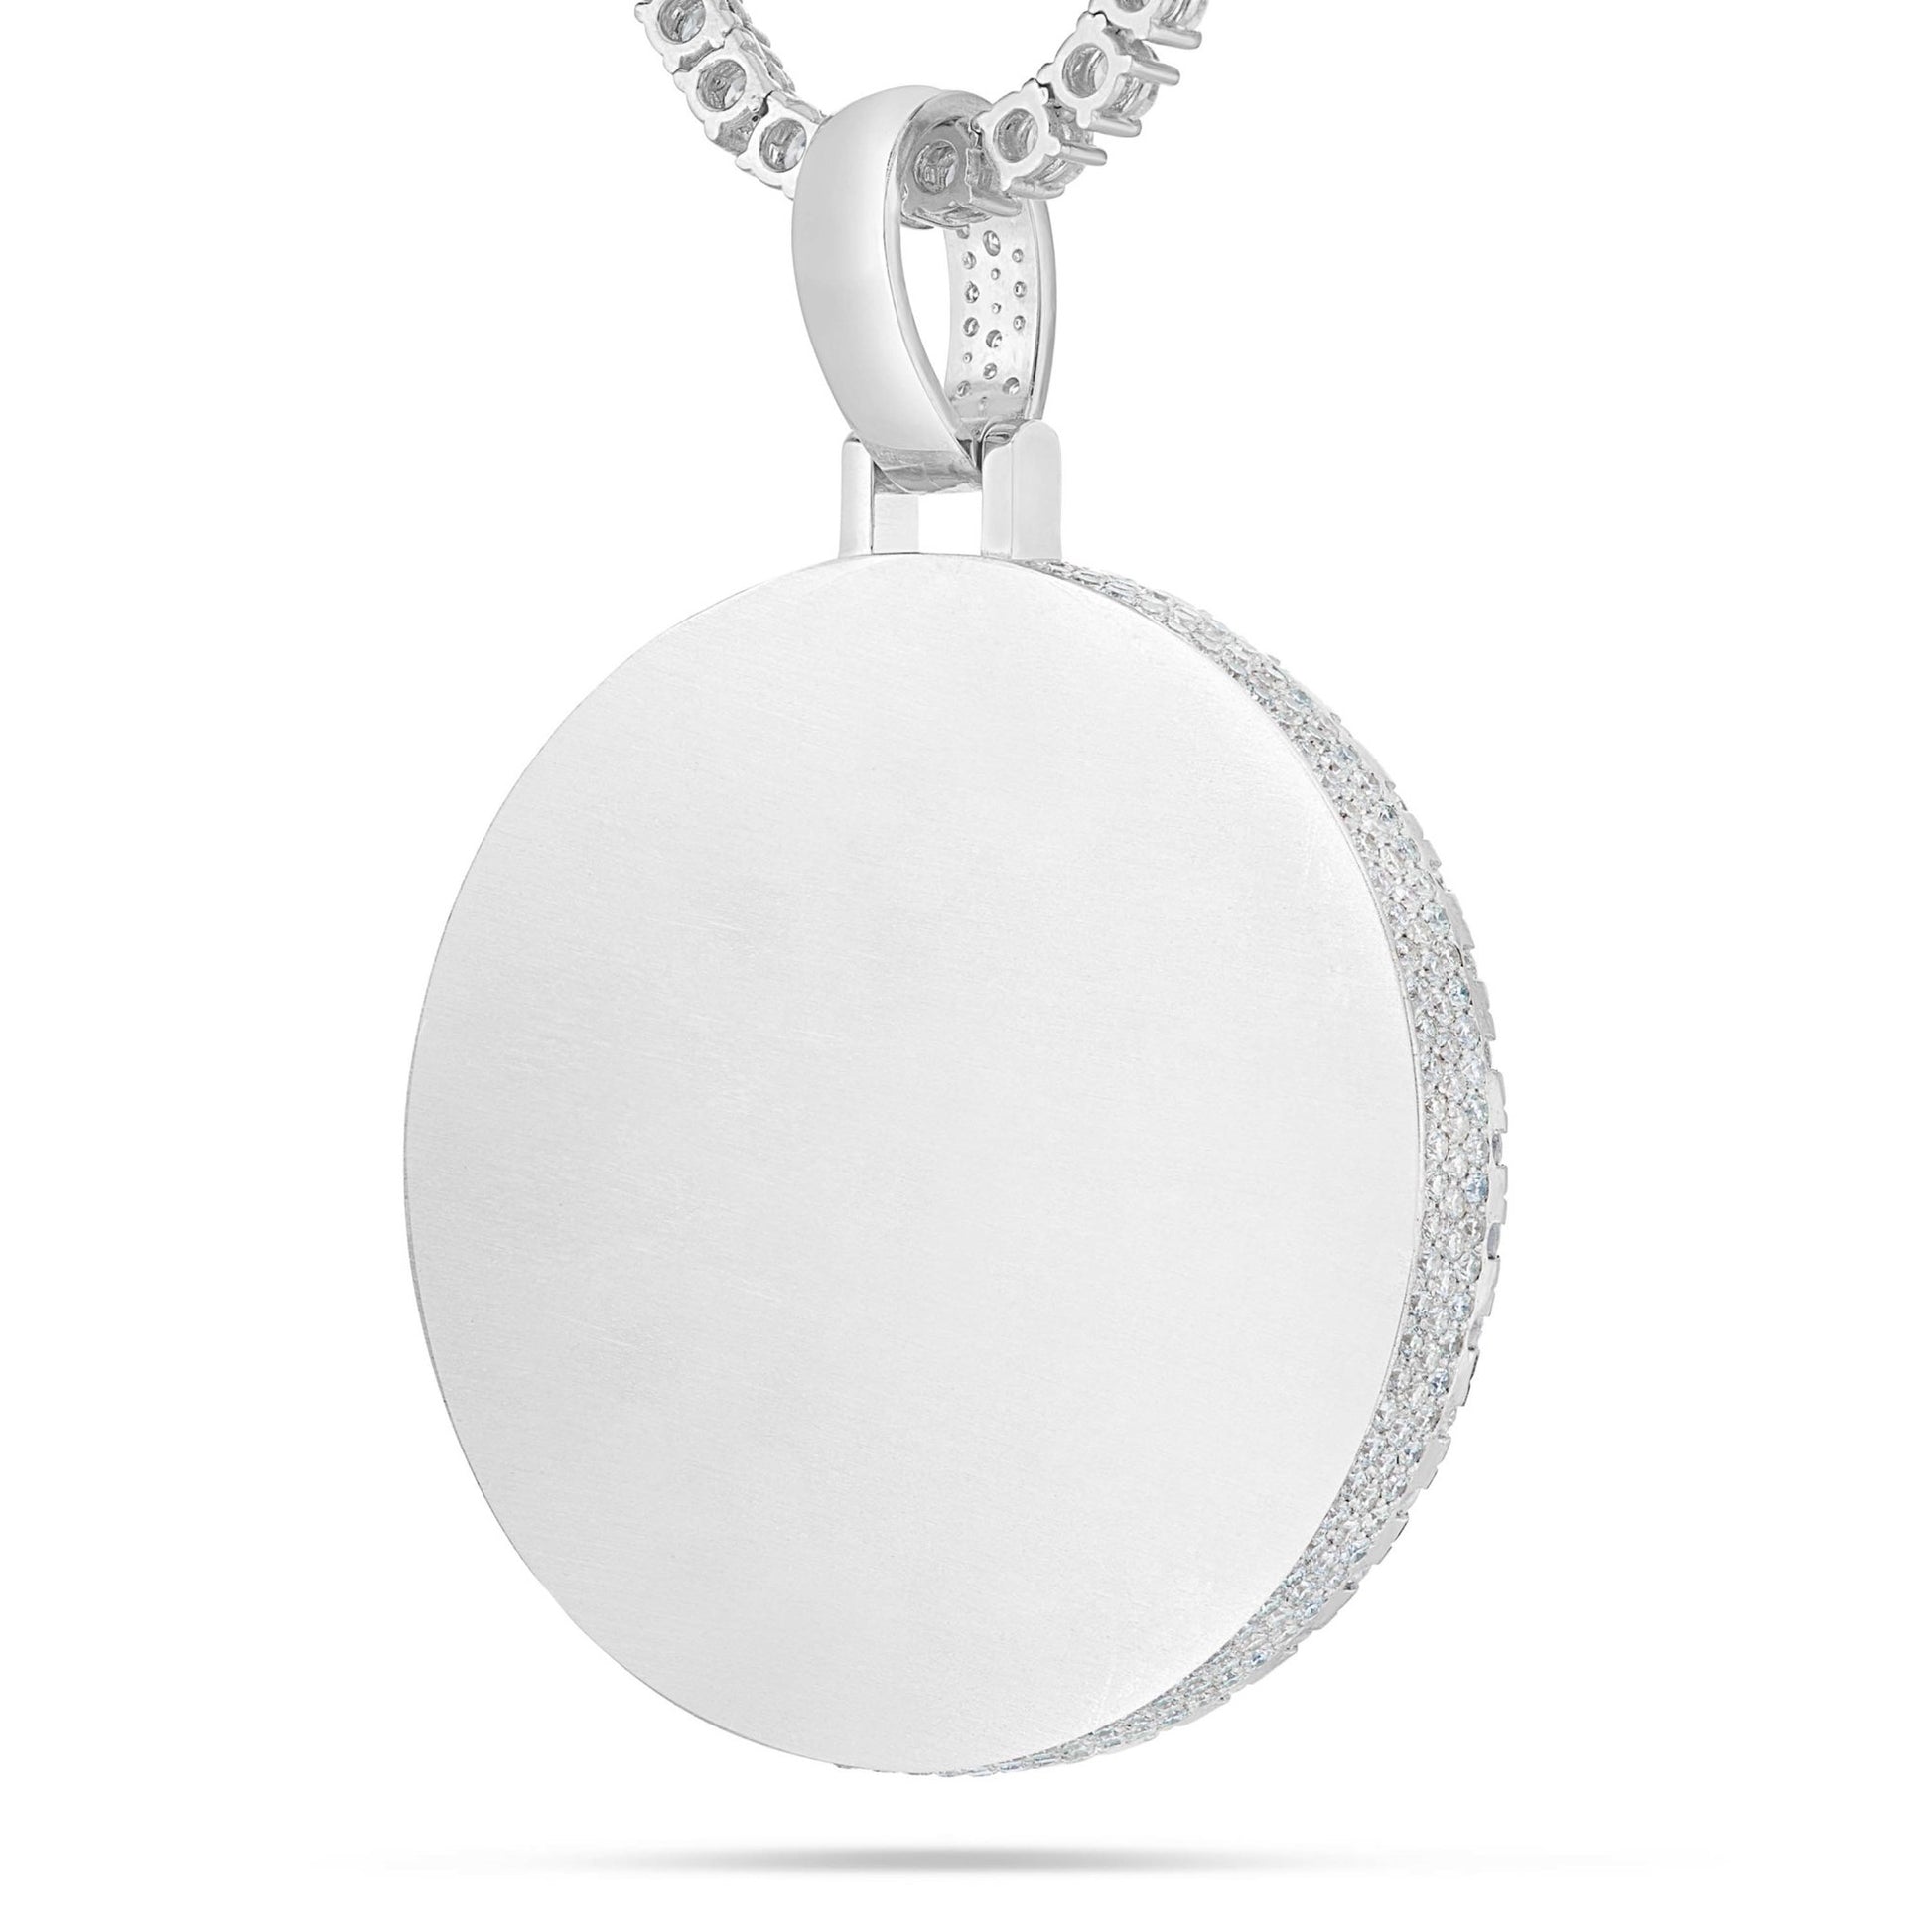 Hollywood Diamond Picture Pendant, 2 Inches - Shyne Jewelers 160-00079 White Gold Shyne Jewelers